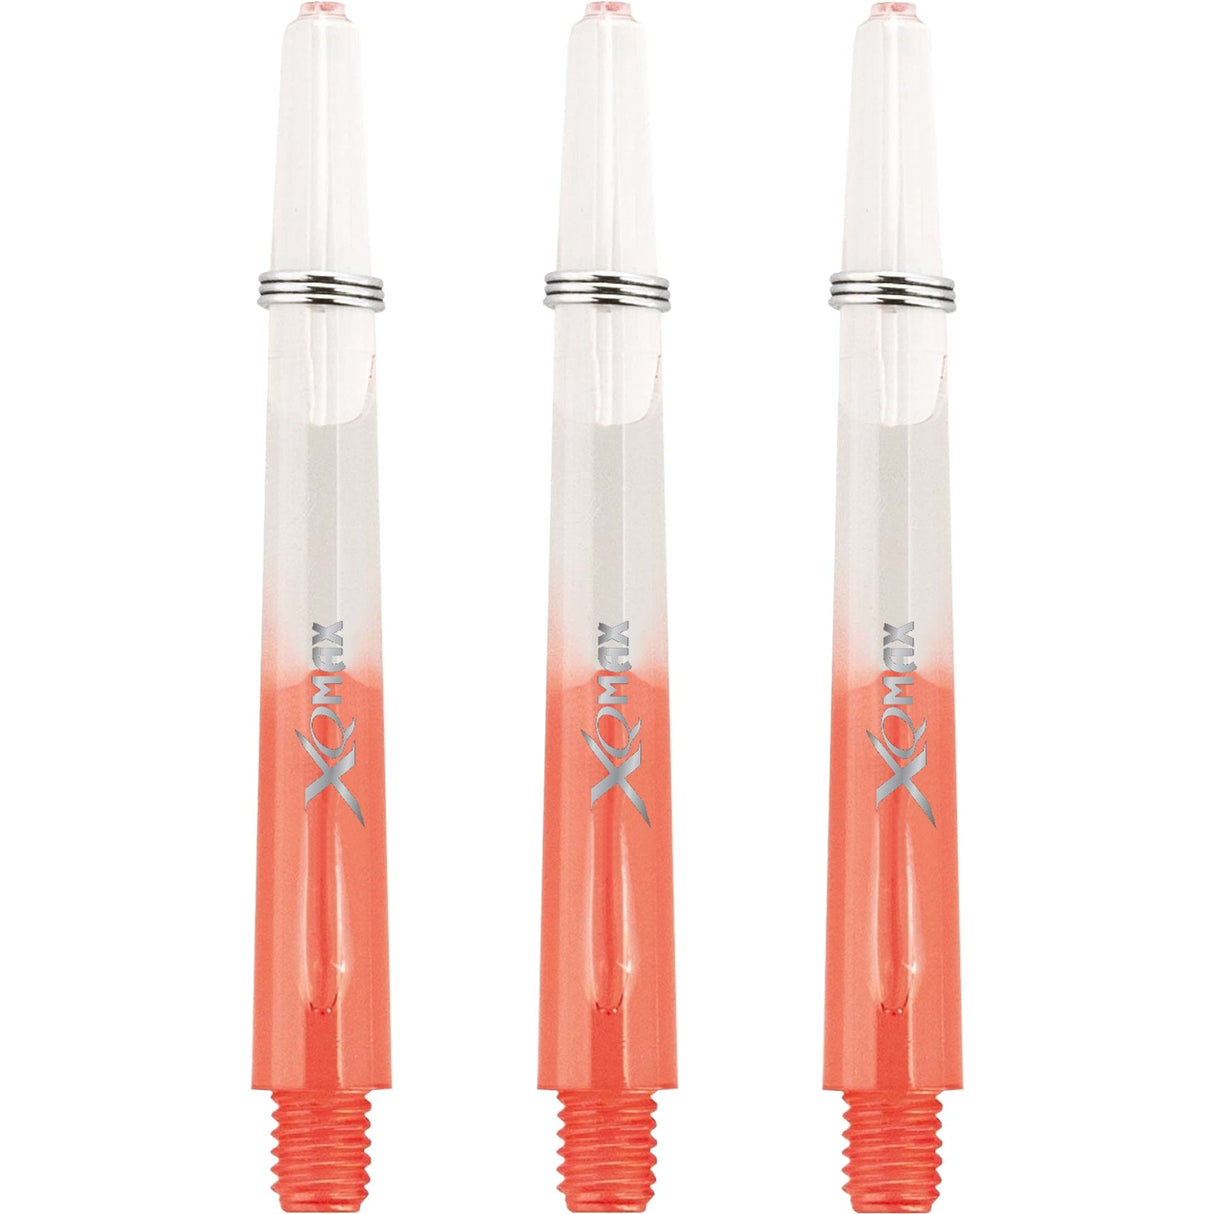 XQMax Gradient Polycarbonate Dart Shafts - with Logo - includes Springs - Transparent & Red Medium